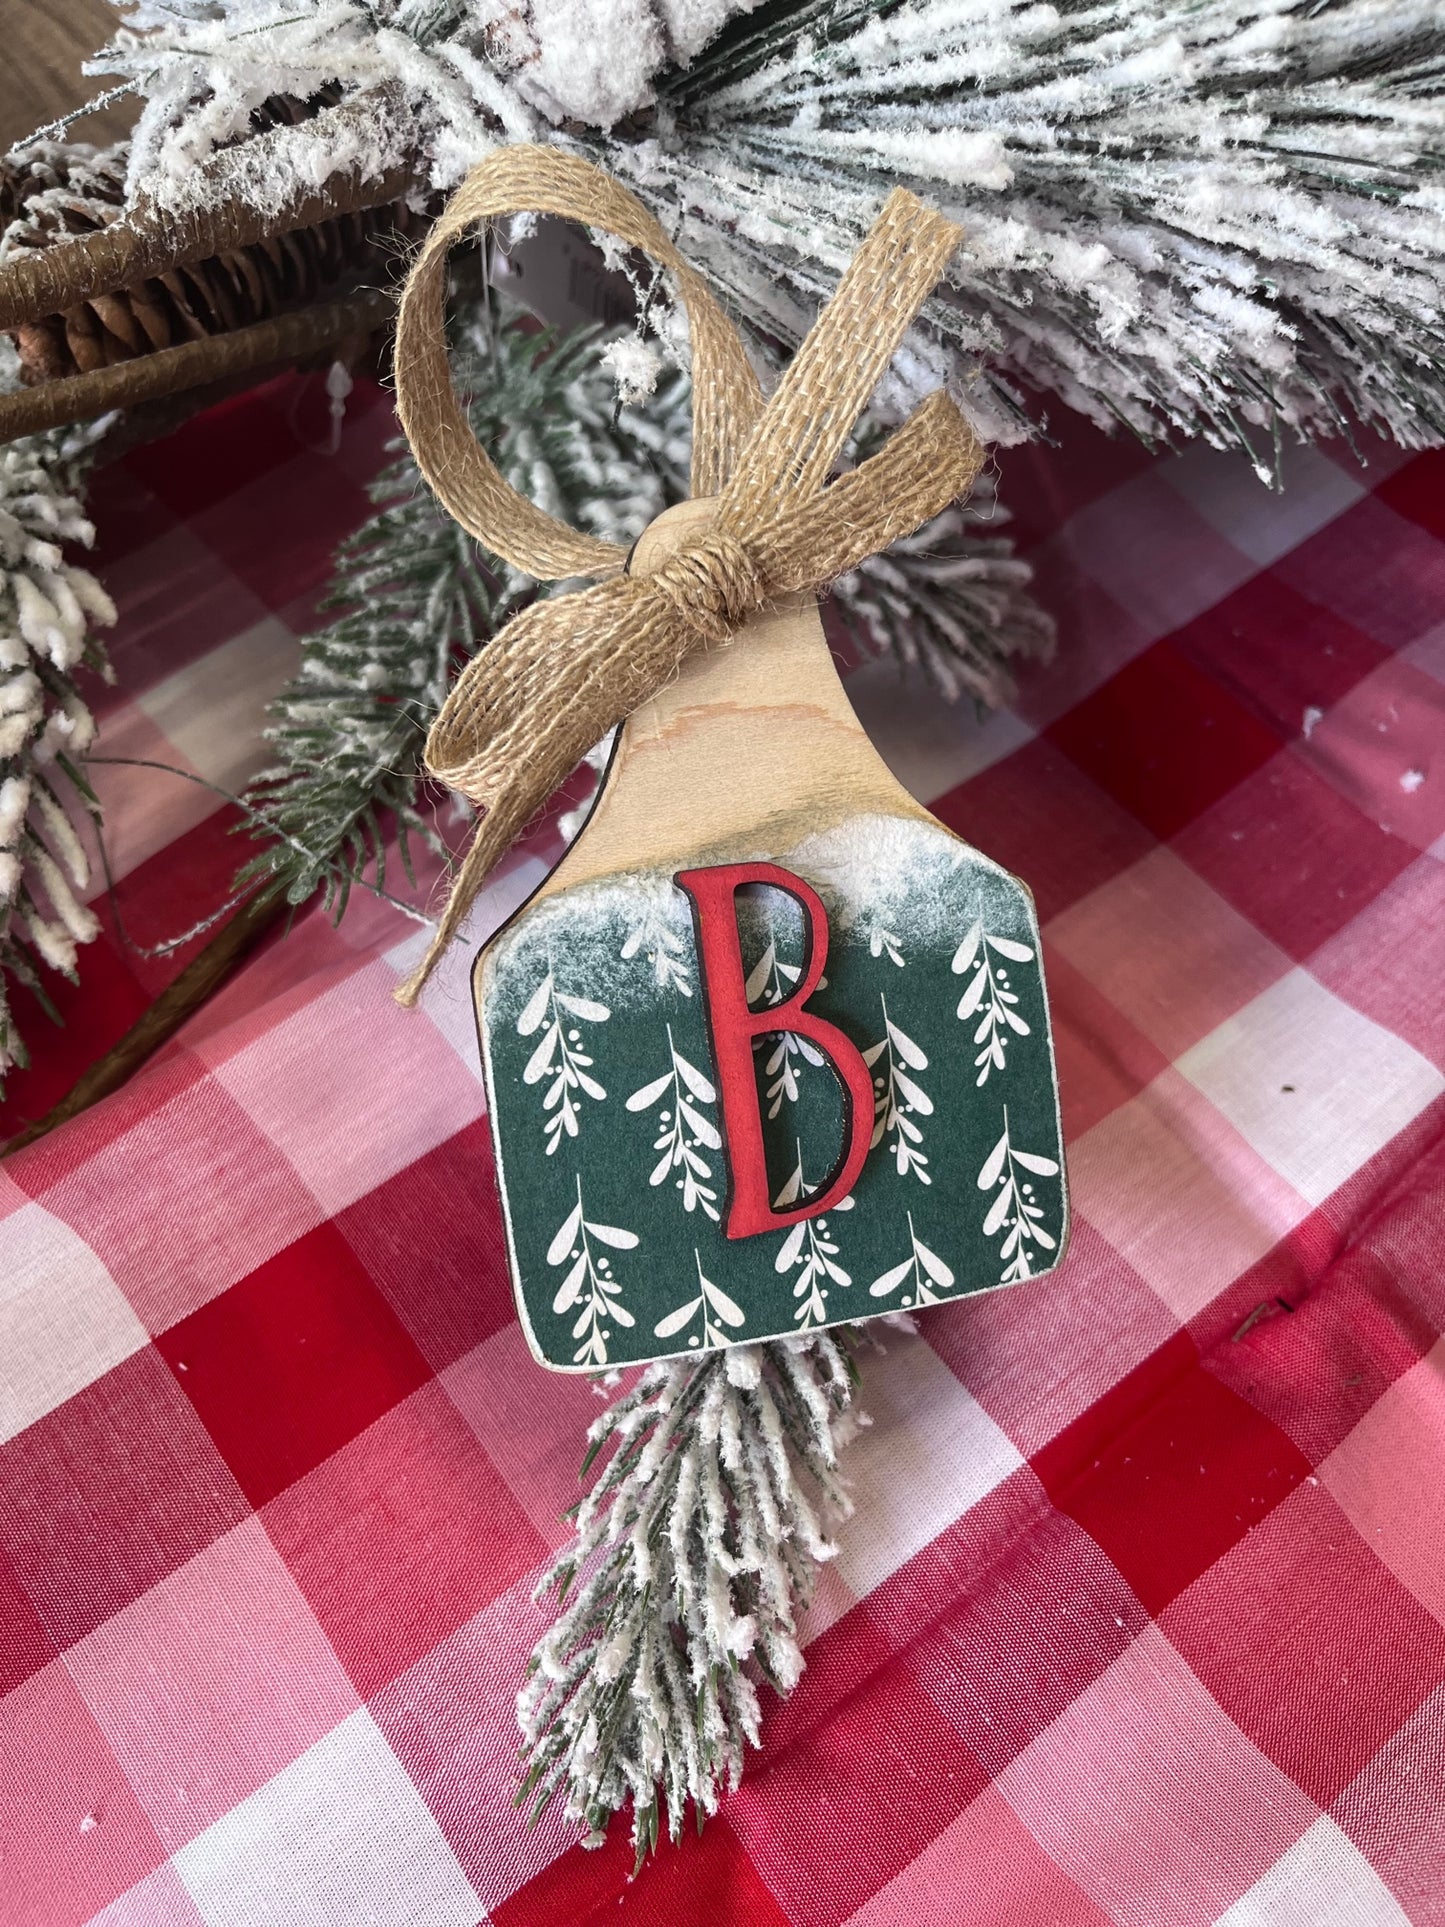 PERSONALIZED PATTERNED INITIAL COW TAG ORNAMENT